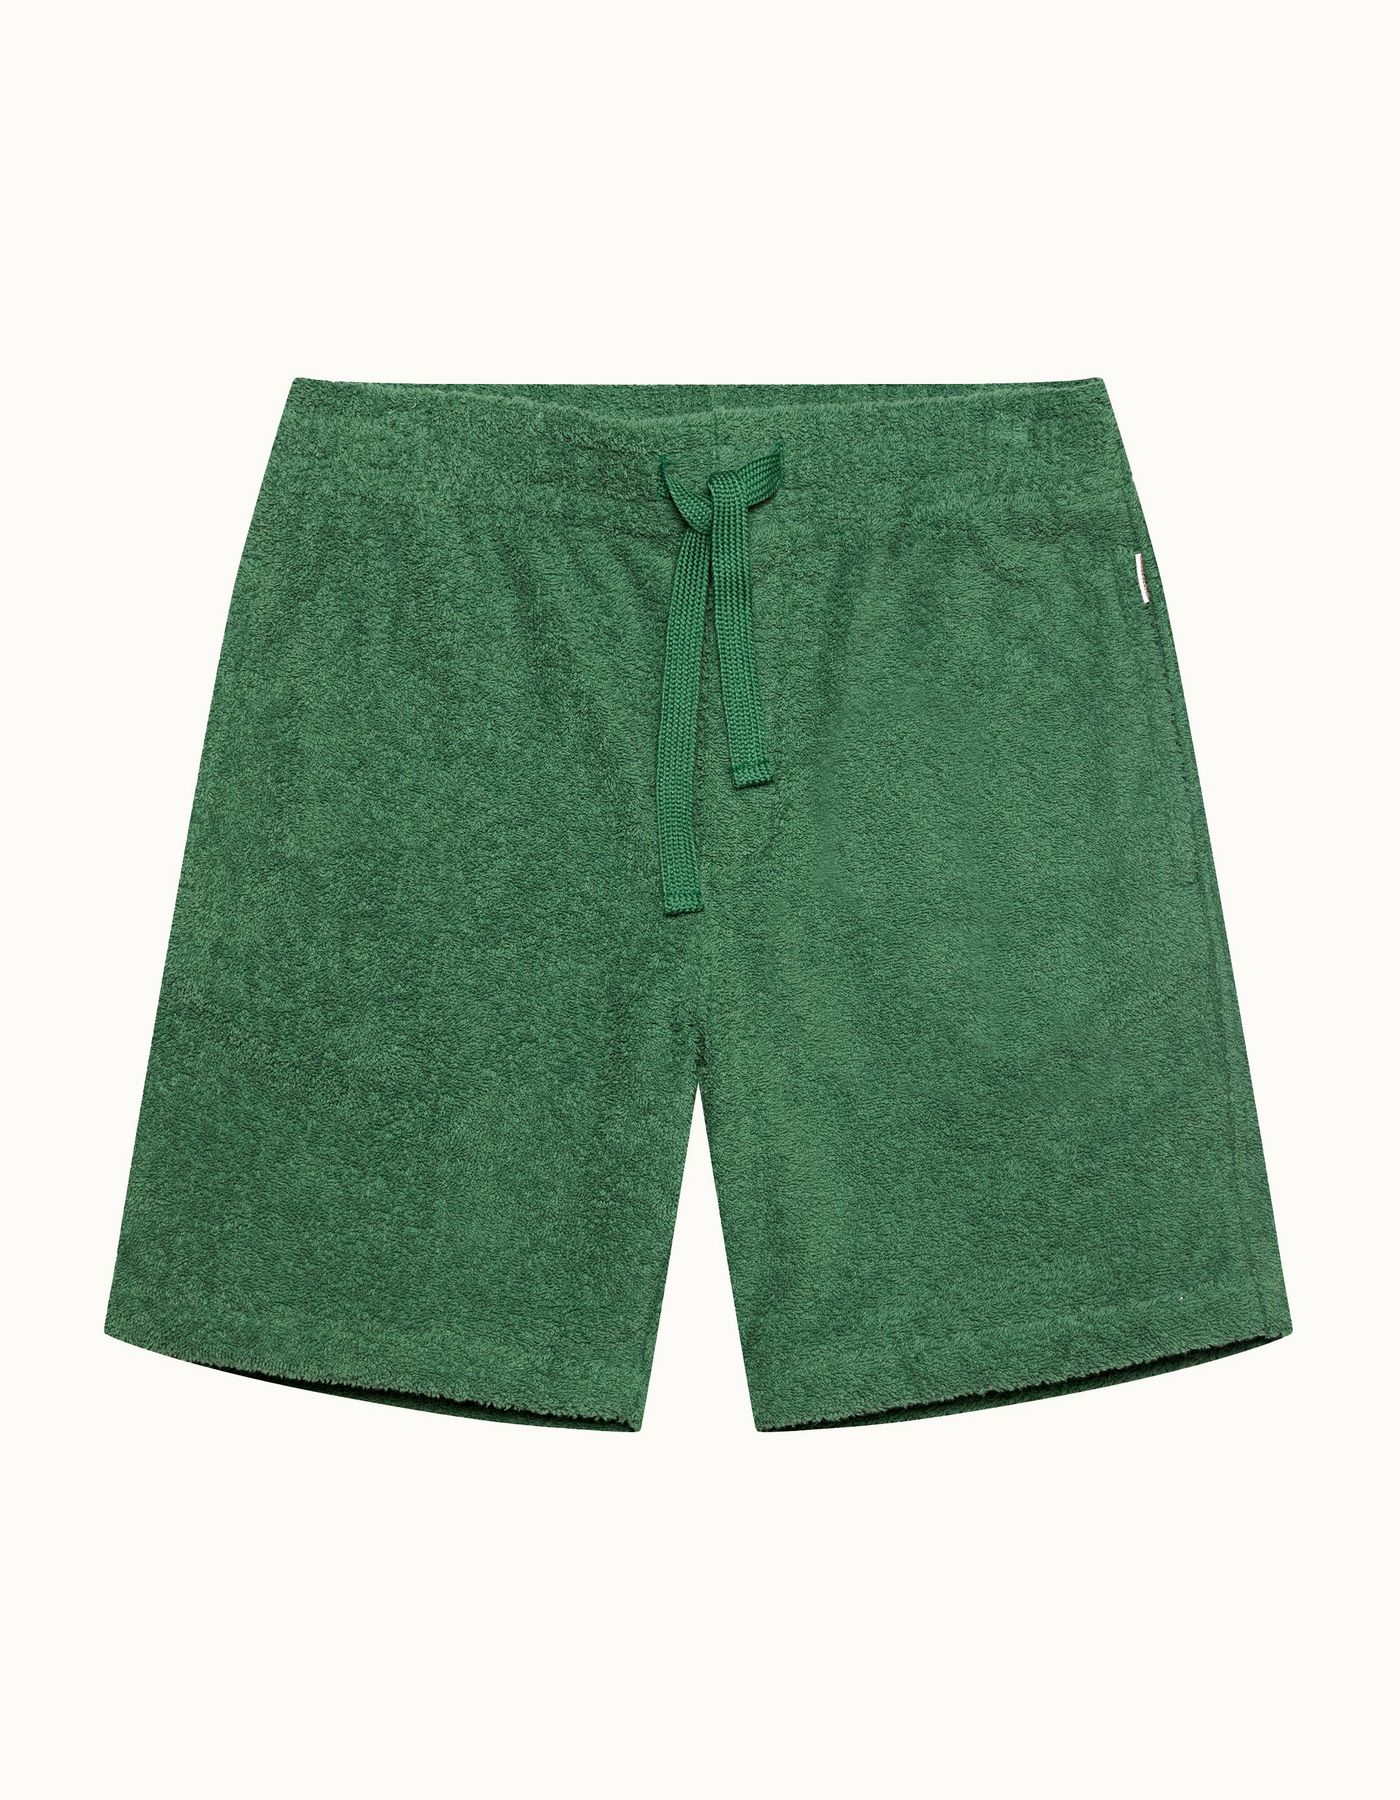 Trevone Towelling - Mens Kale Classic Fit Cotton Towelling Sweat Shorts